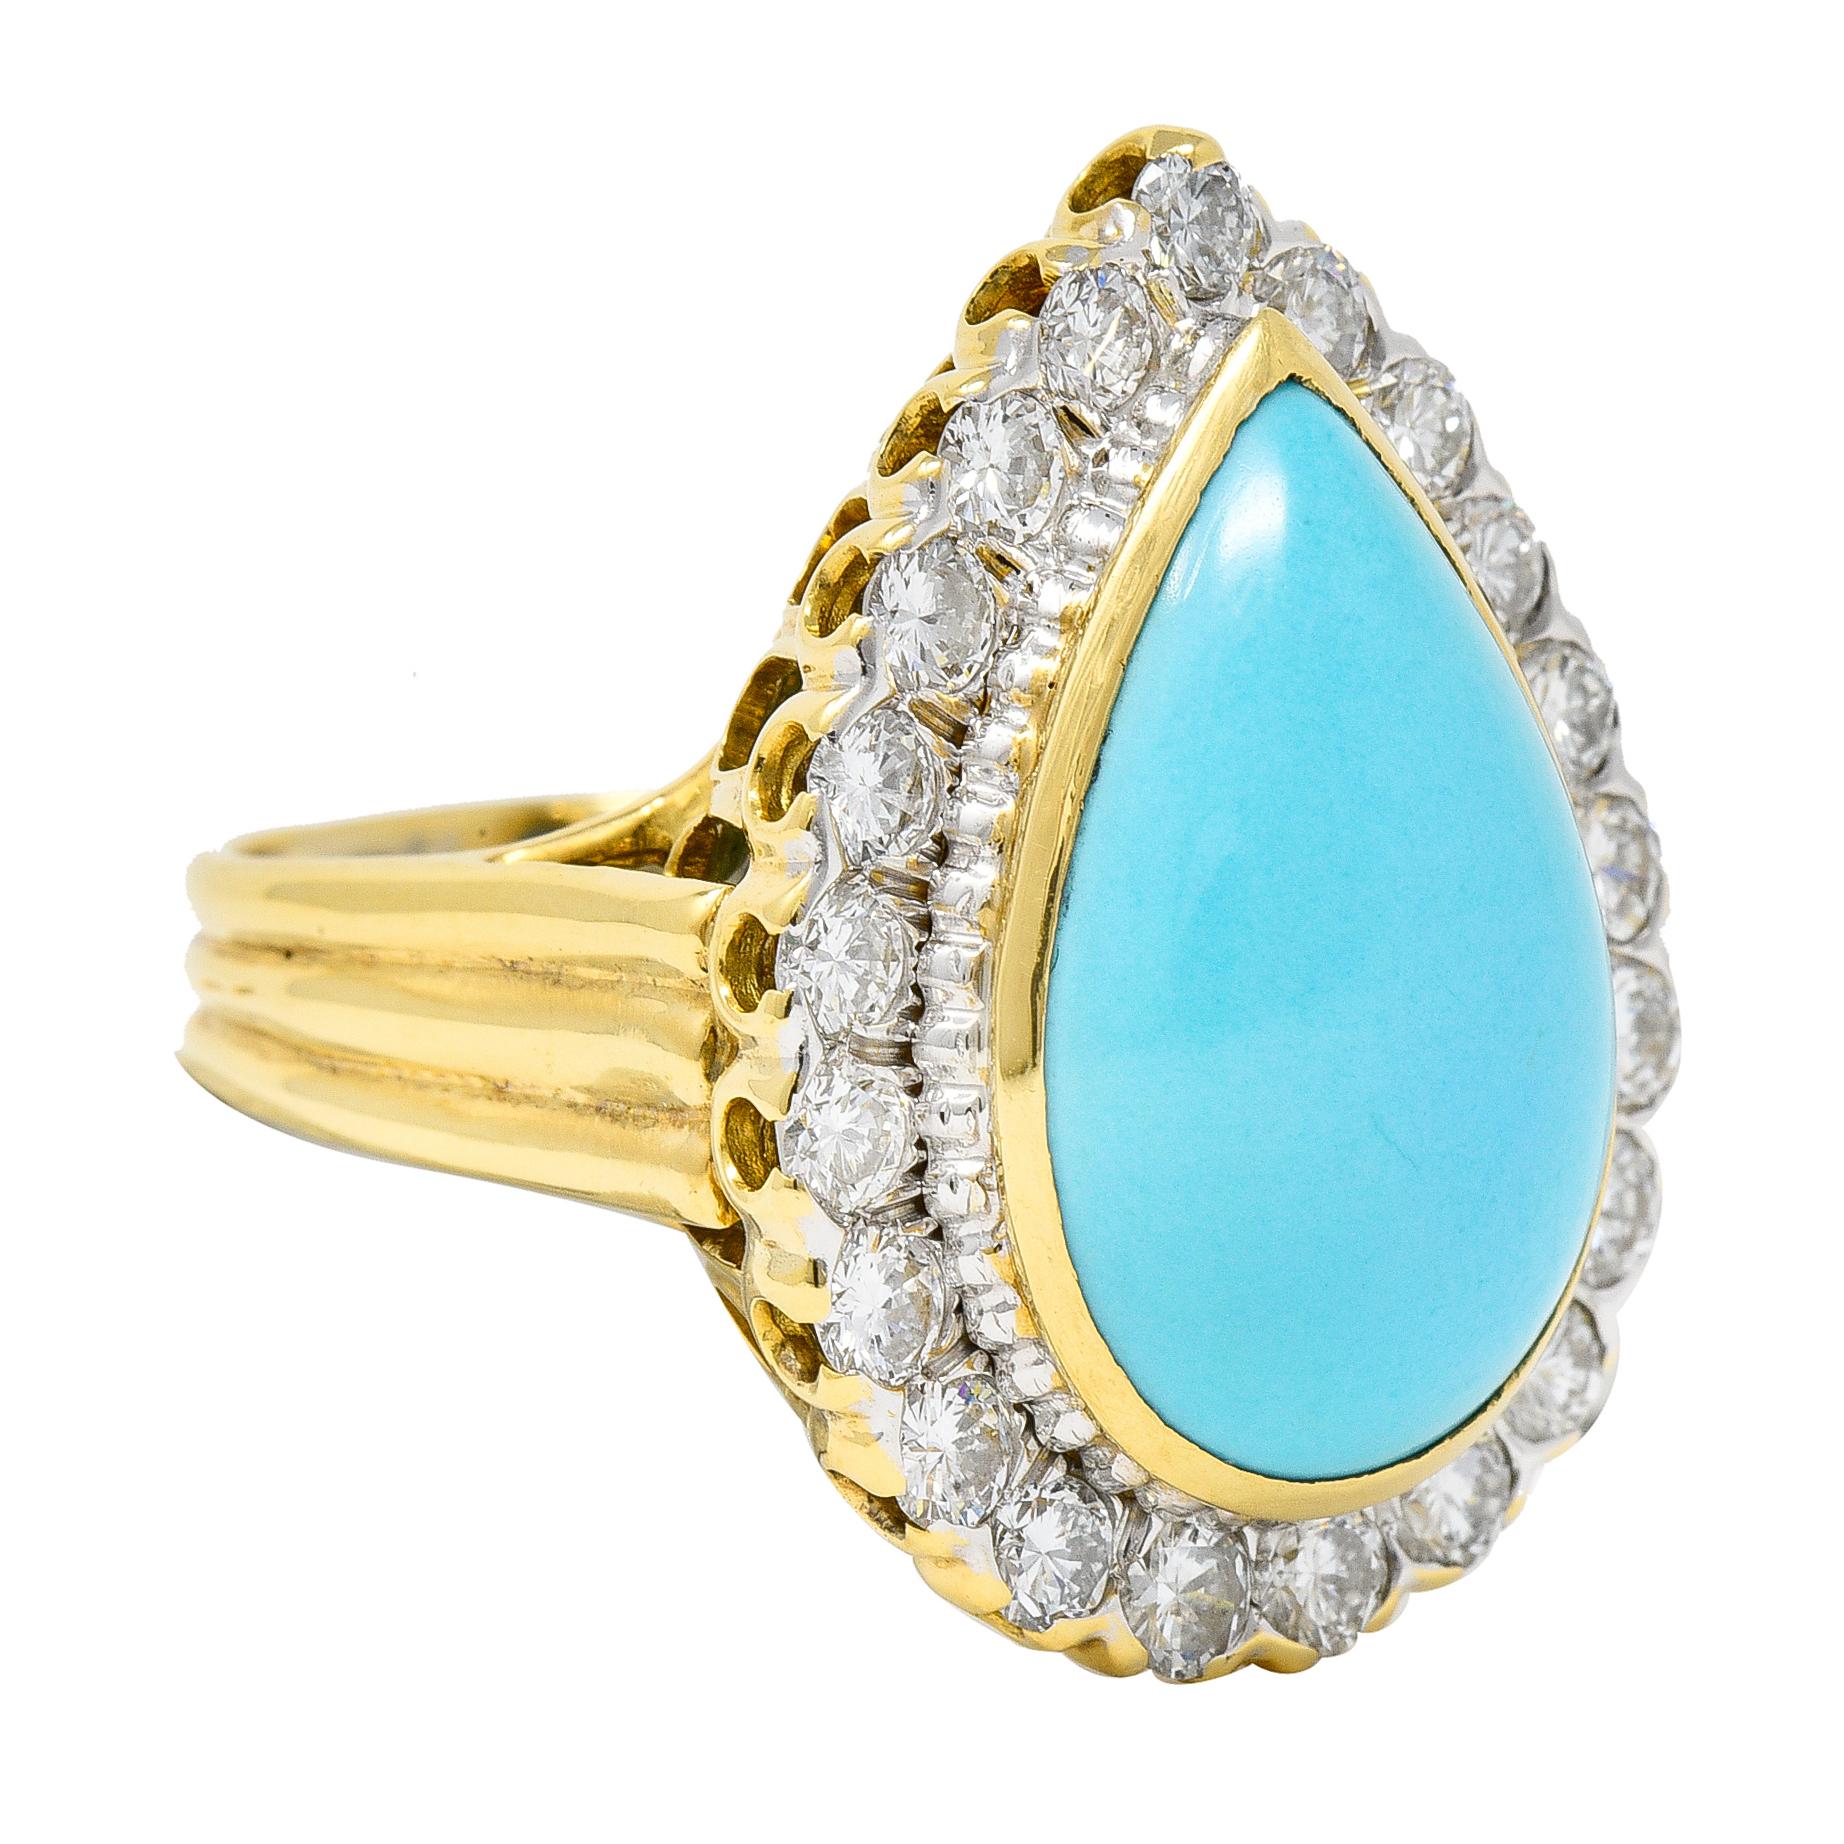 Centering a pear shaped turquoise cabochon measuring 13.0 x 20.0 mm - opaque robin's egg blue. Set in a polished gold bezel with fluted platinum edged and a halo of round brilliant cut diamonds. Weighing approximately 2.10 carats total - G/H color